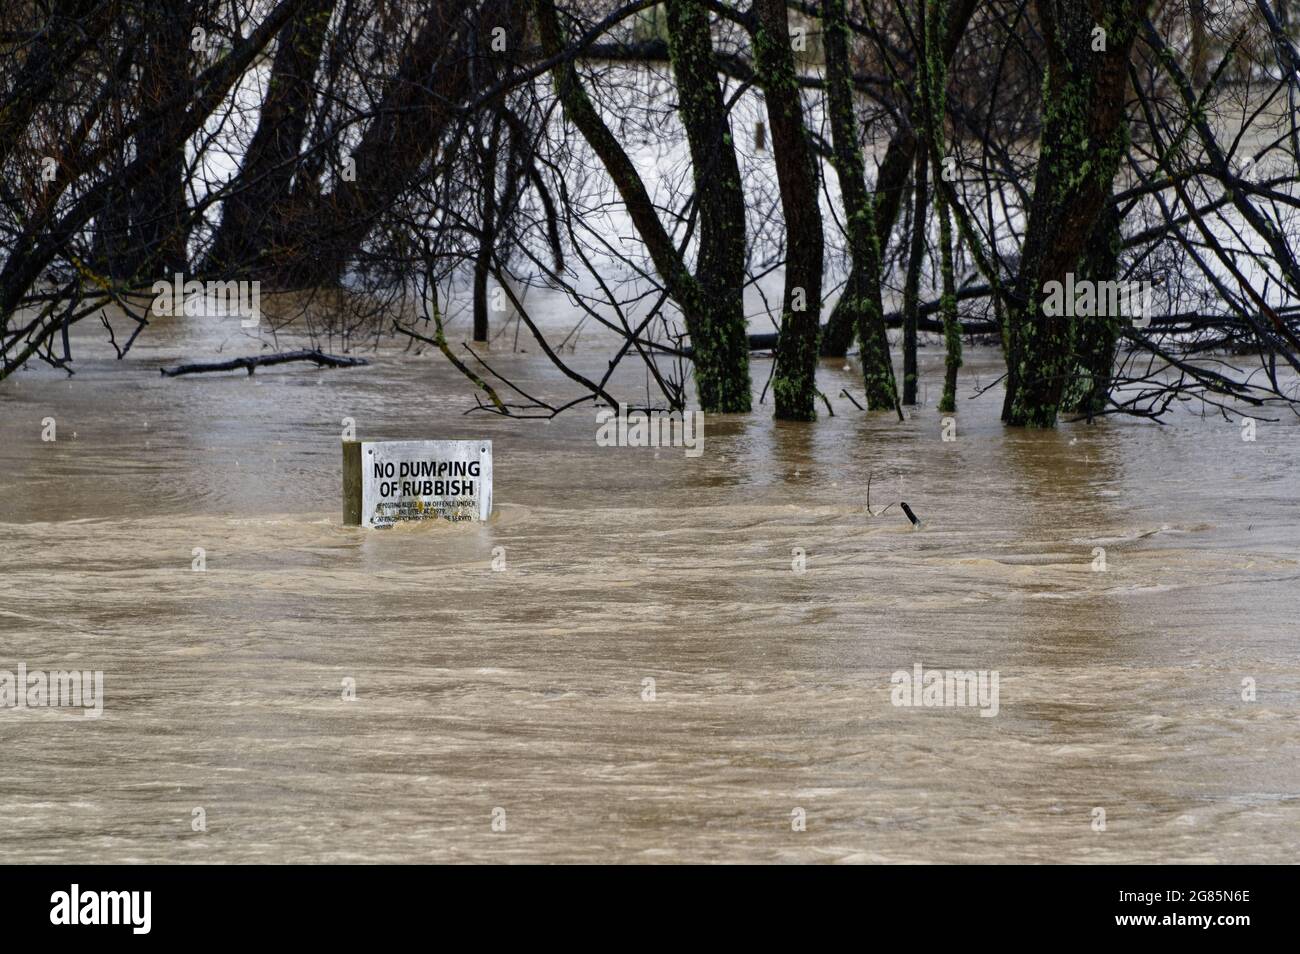 A flooded river nearly covers a 'No Dumping Of Rubbish' sign, flooding the surrounding trees Stock Photo